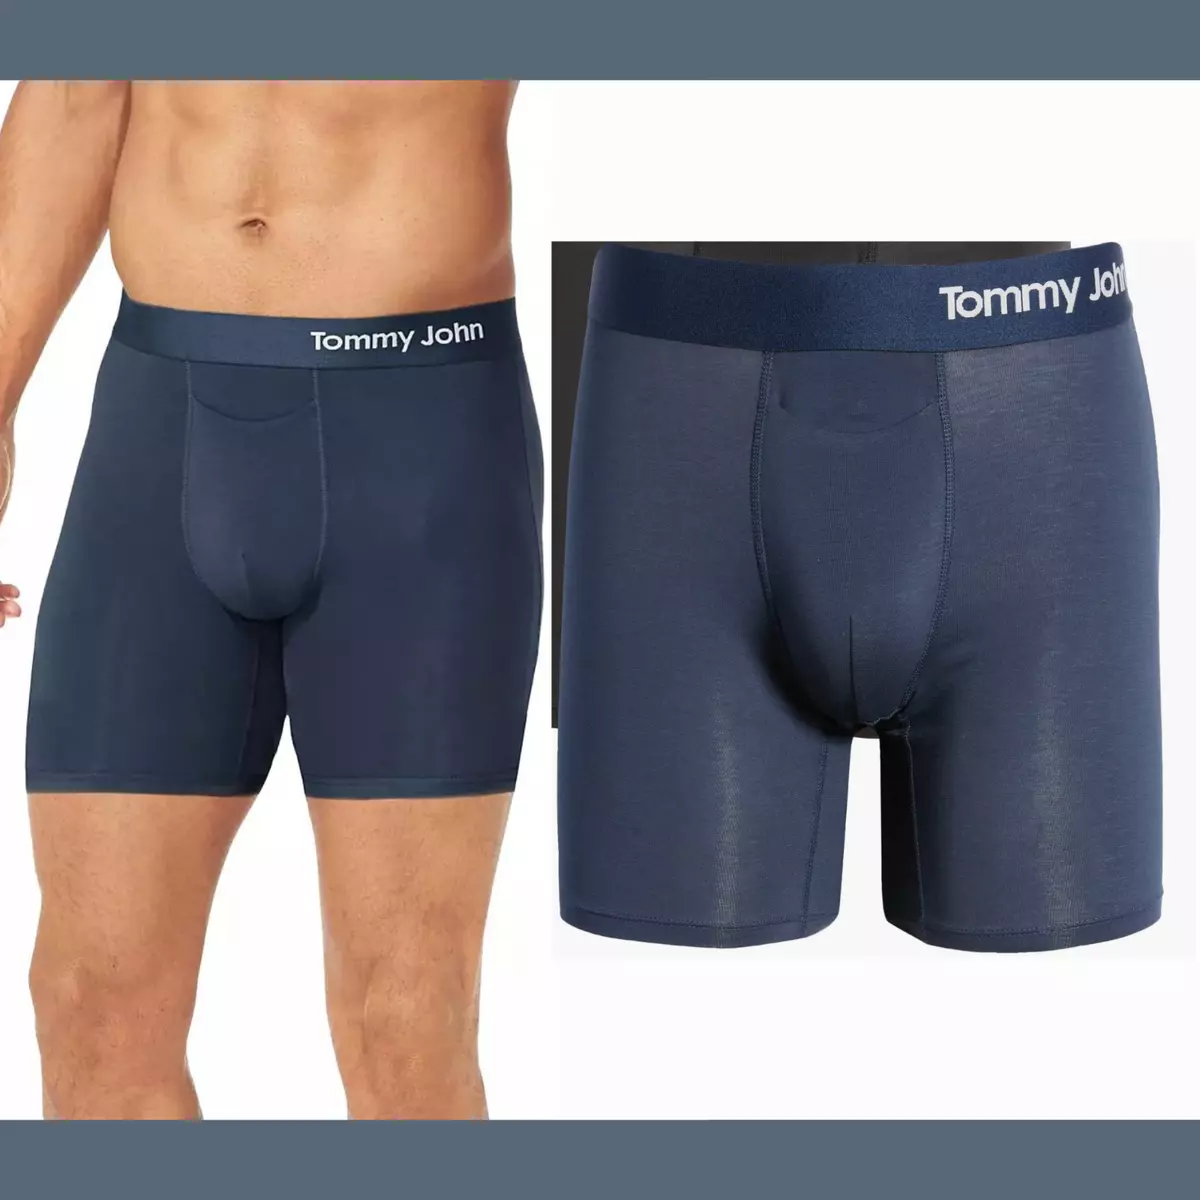 NWT $32 TOMMY JOHN [ Large ] Cool Cotton 6-Inch Boxer Briefs in